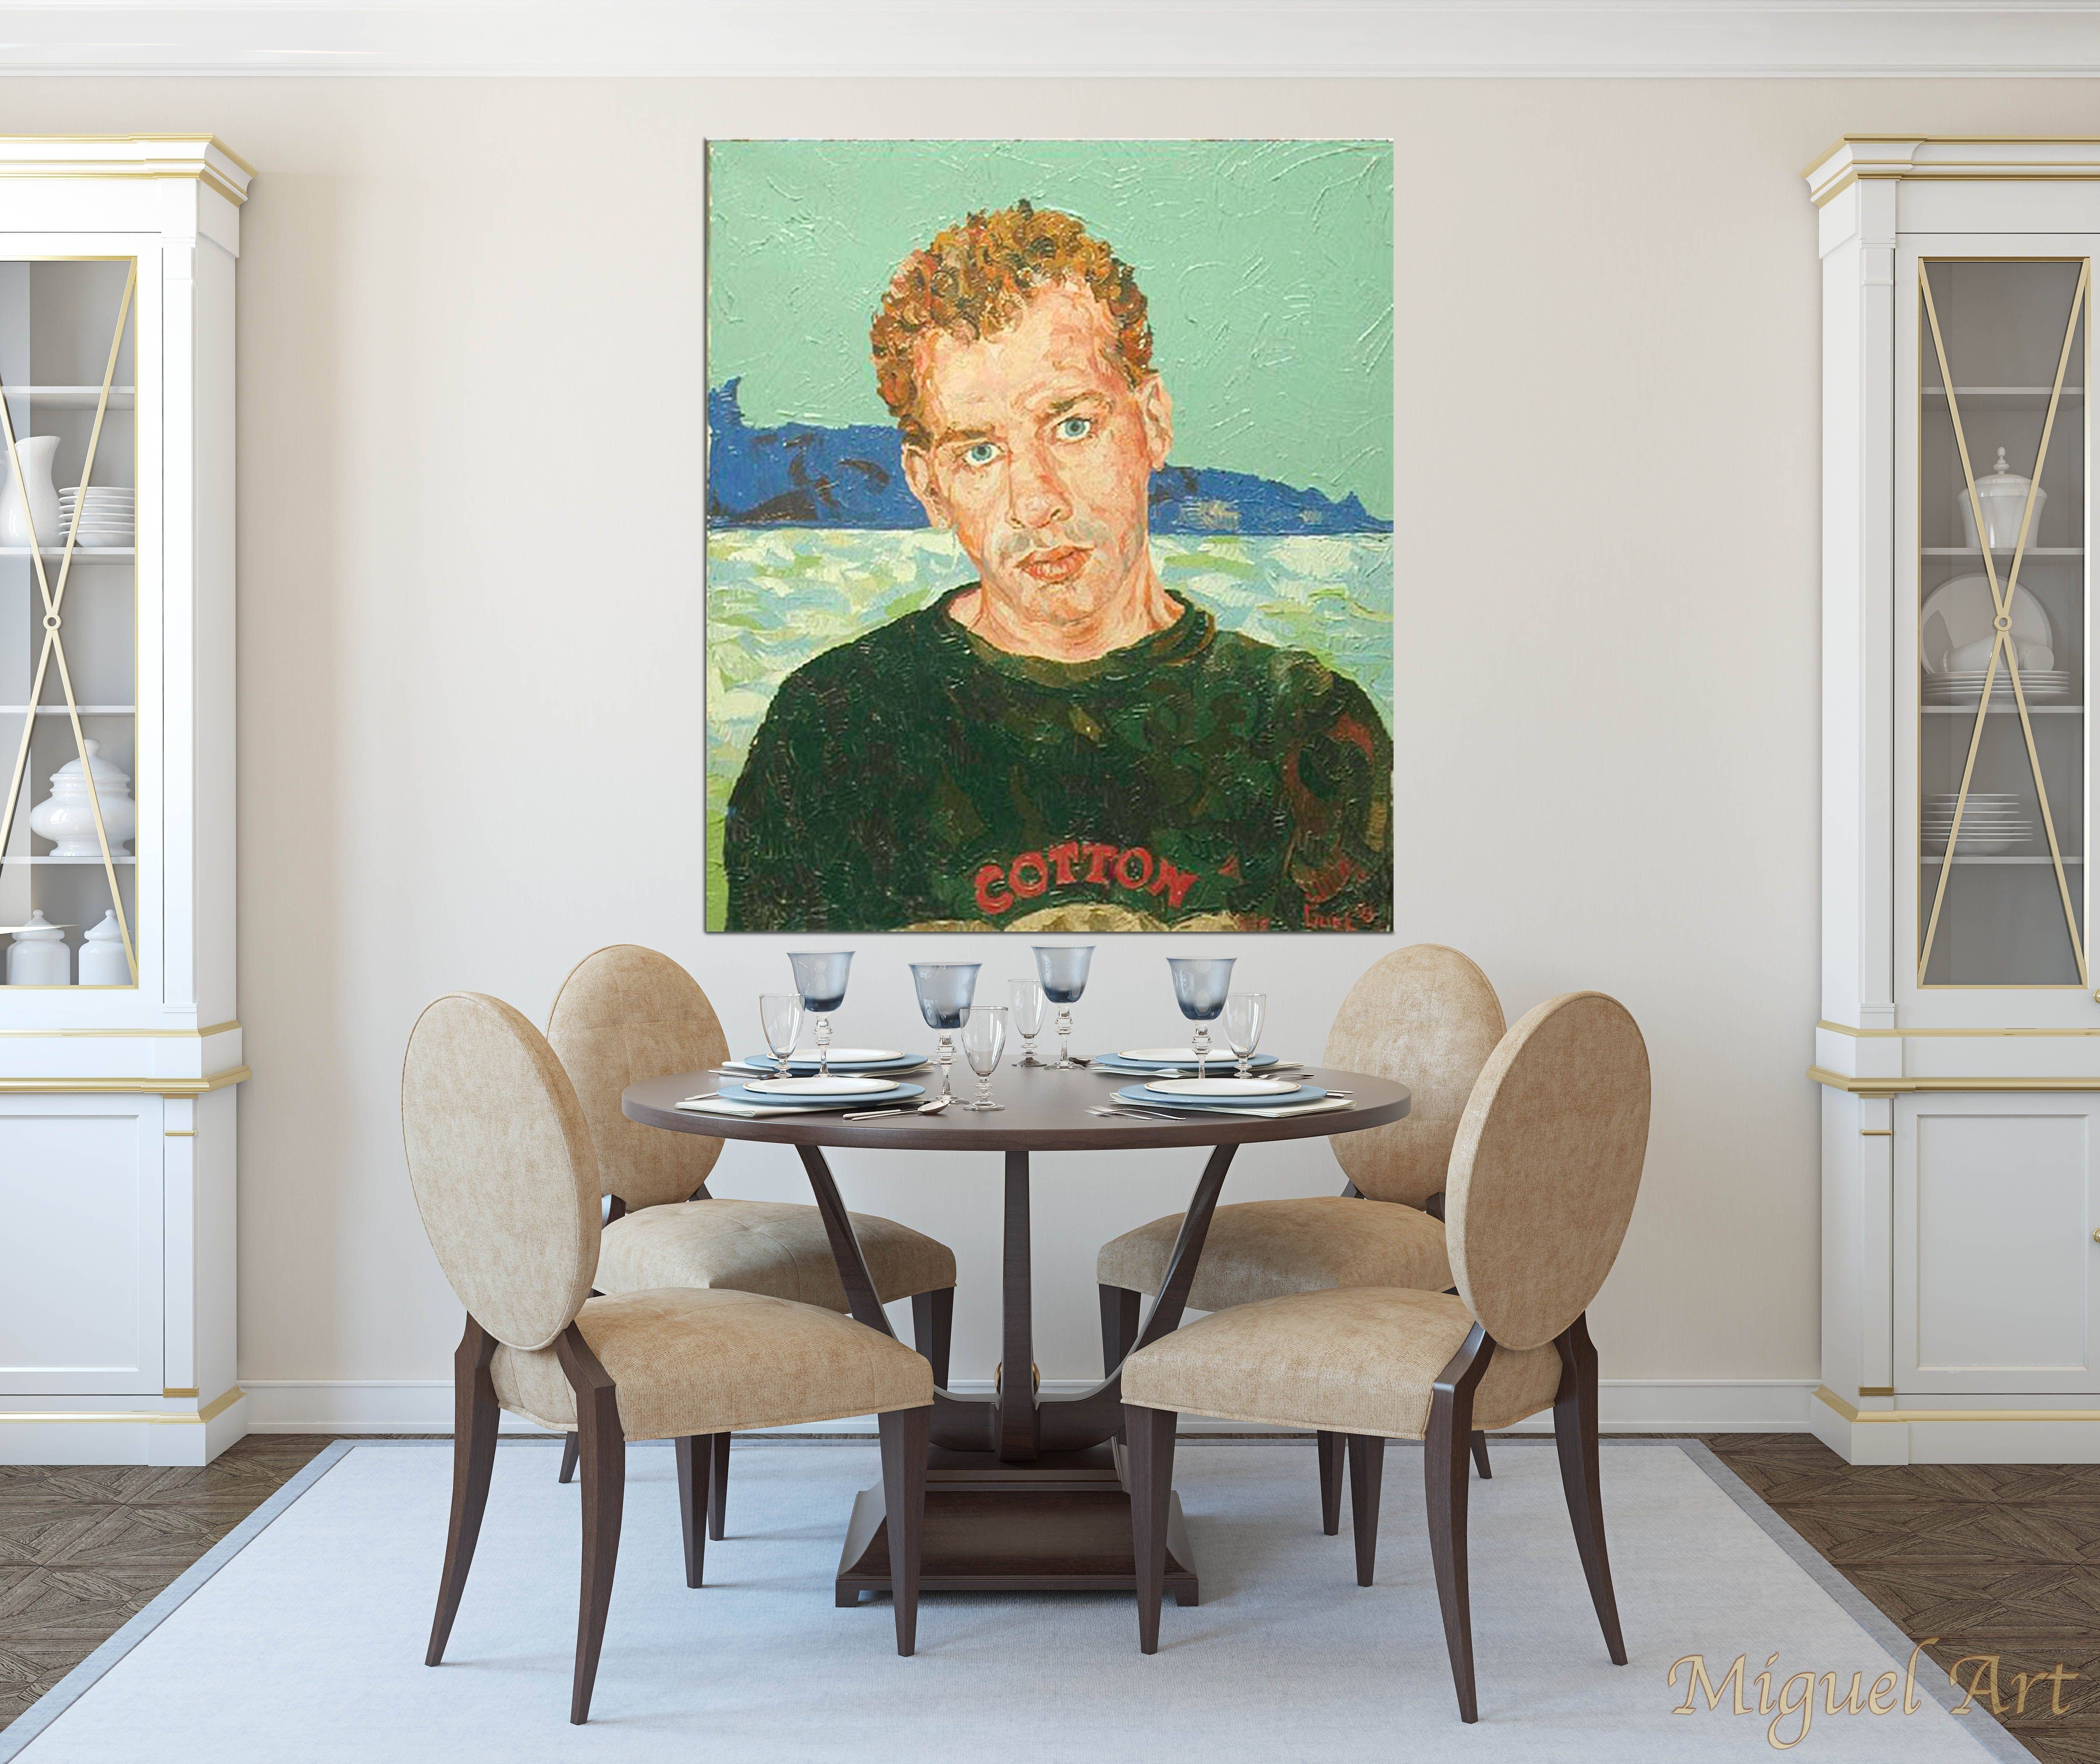 Painting of Curly displayed in a dining room on a cream wall